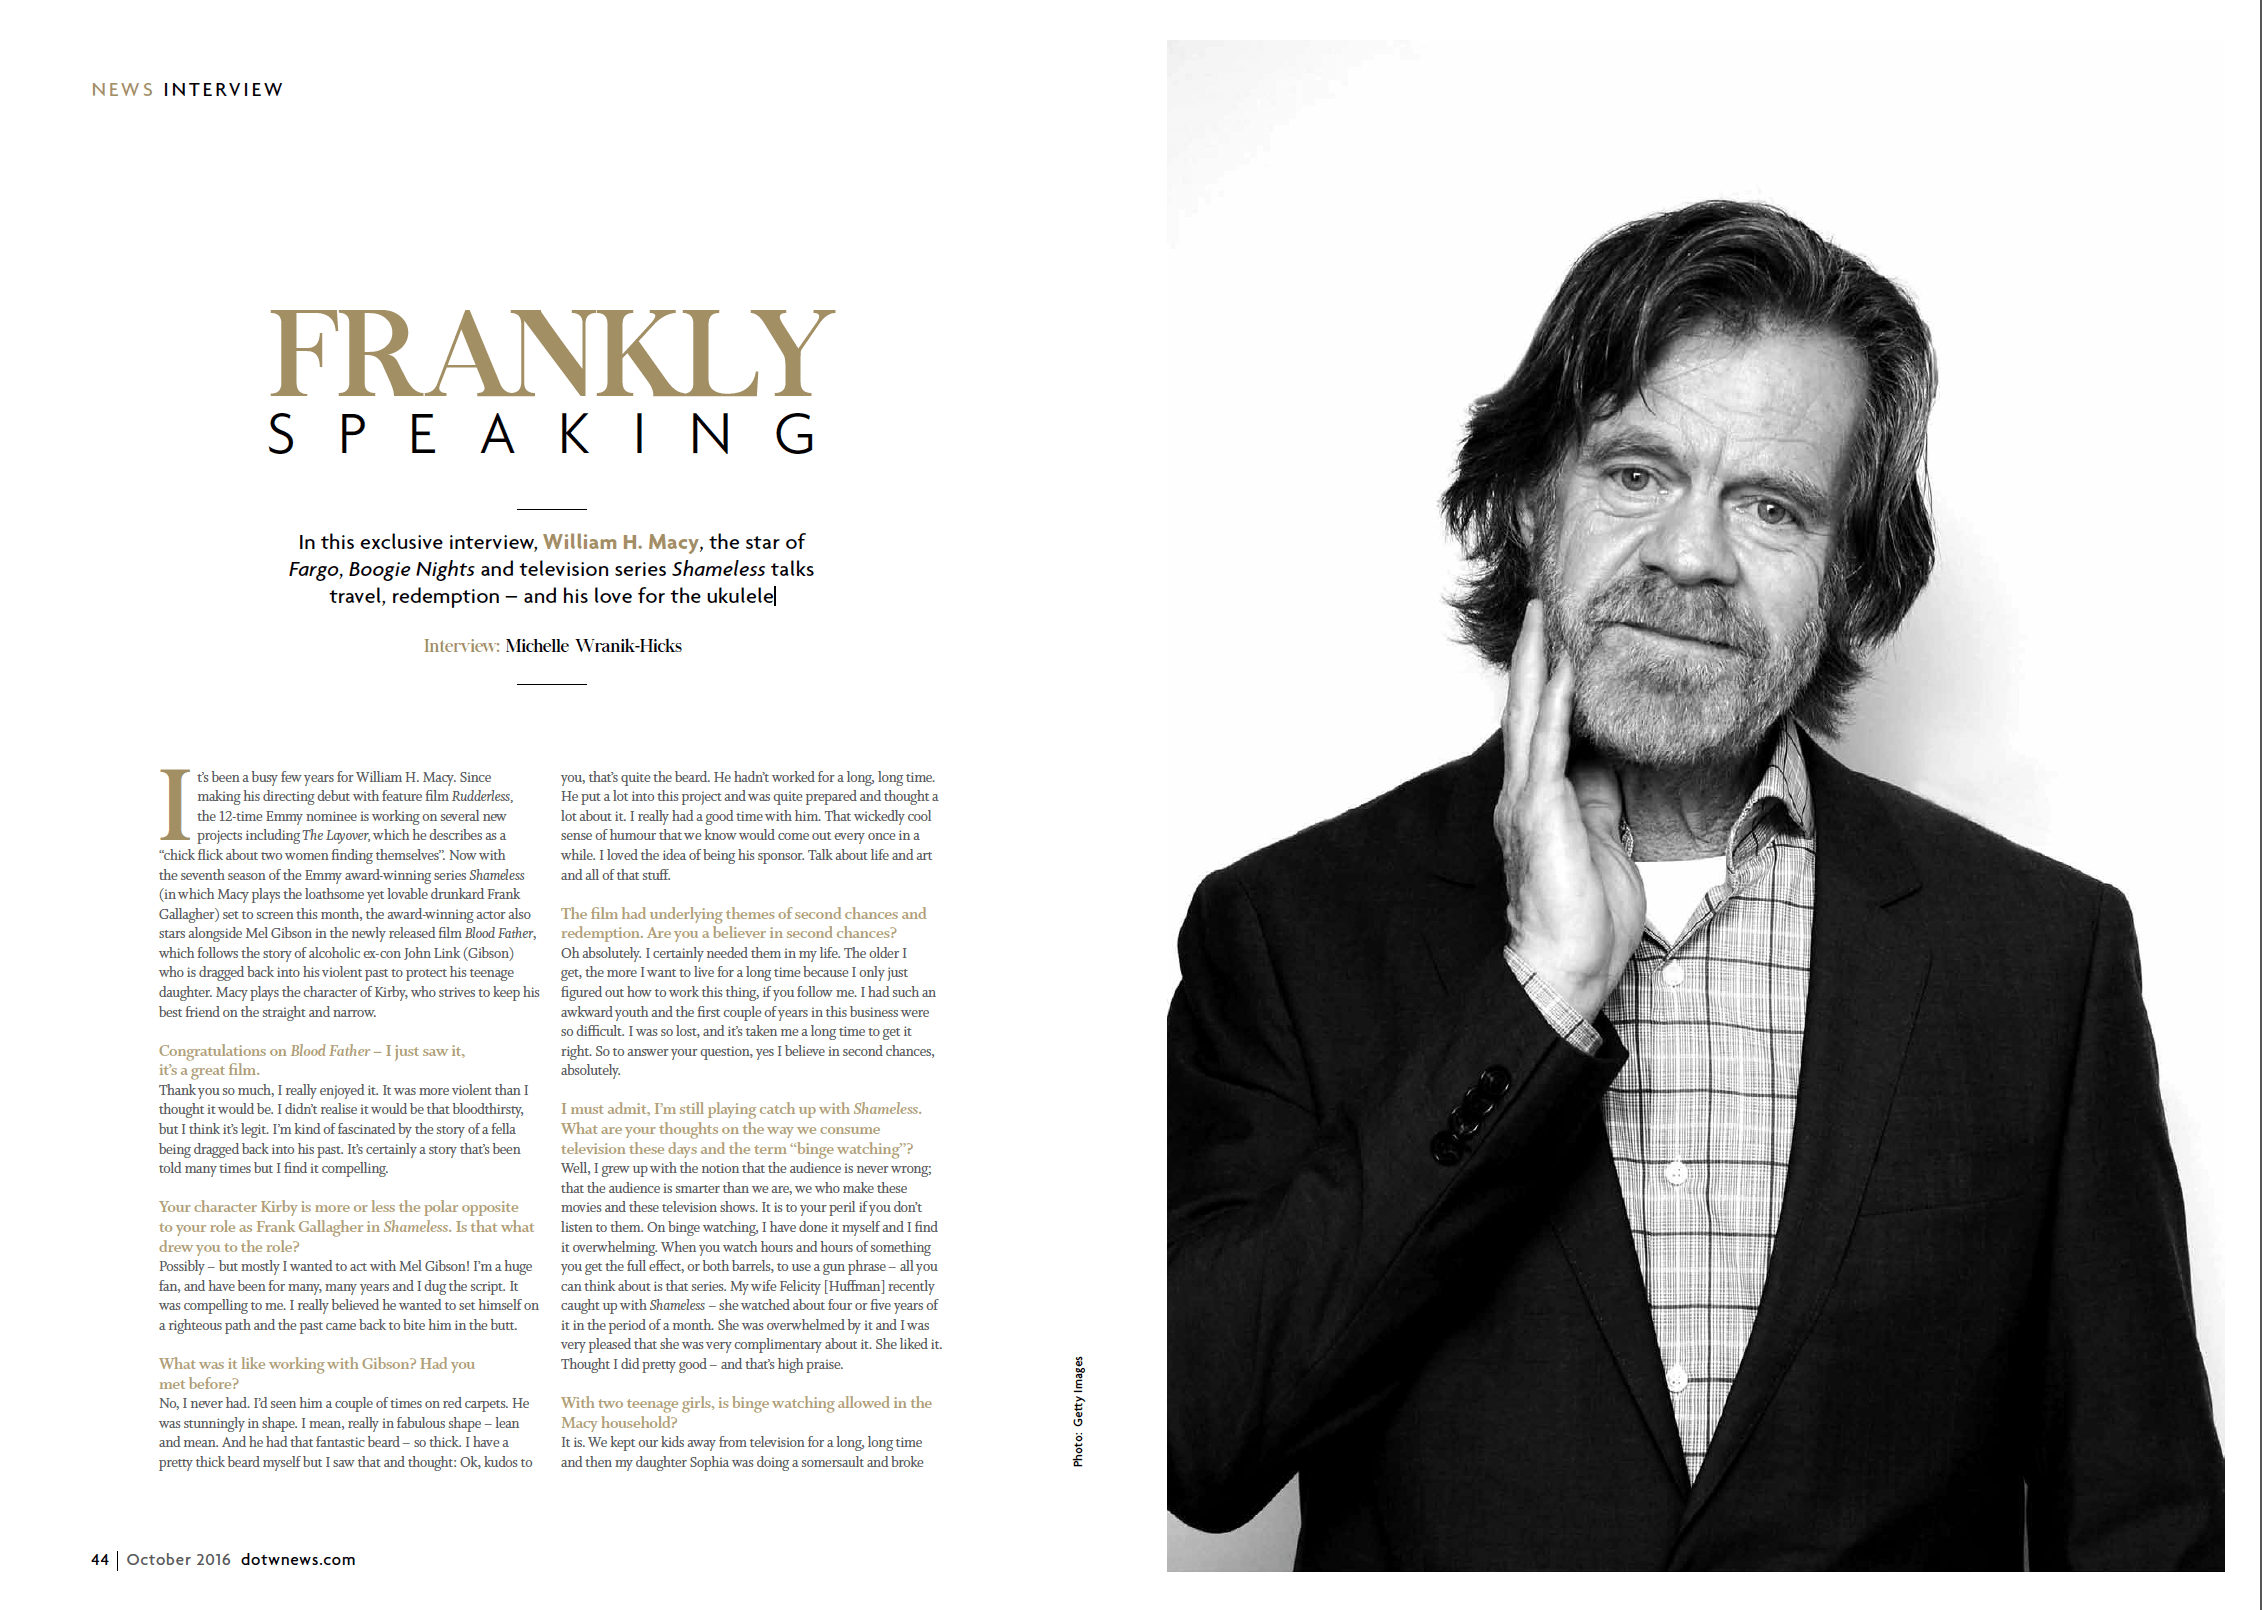 FRANKLY SPEAKING: AN INTERVIEW WITH WILLIAM H. MACY